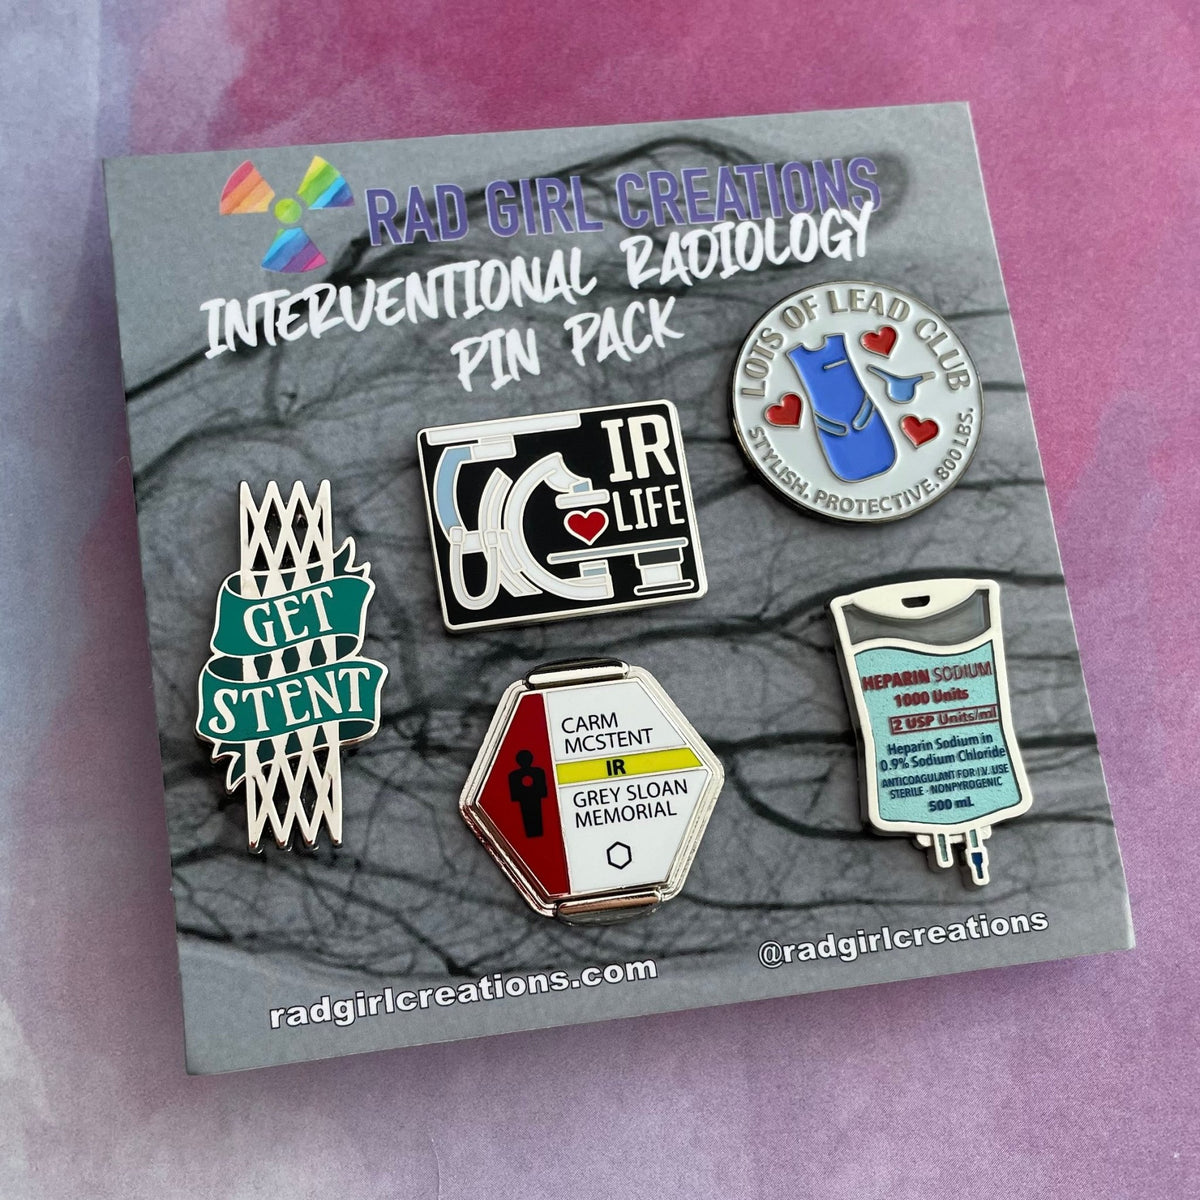 Interventional Radiology Pin Pack - Rad Girl Creations